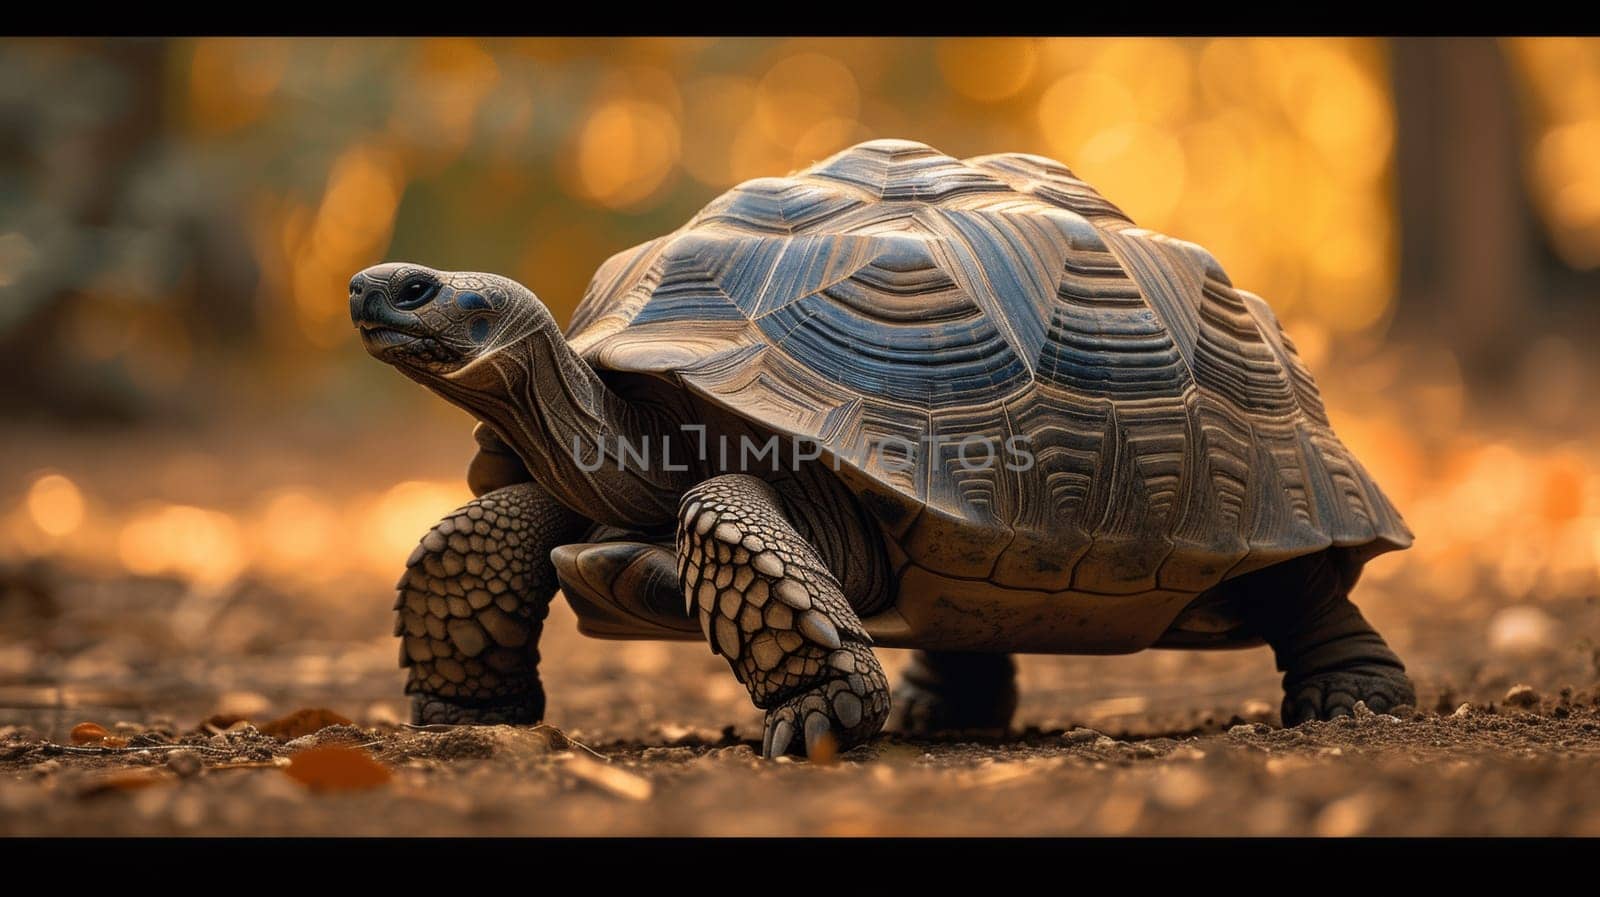 A turtle walking on the ground in a forest setting, AI by starush